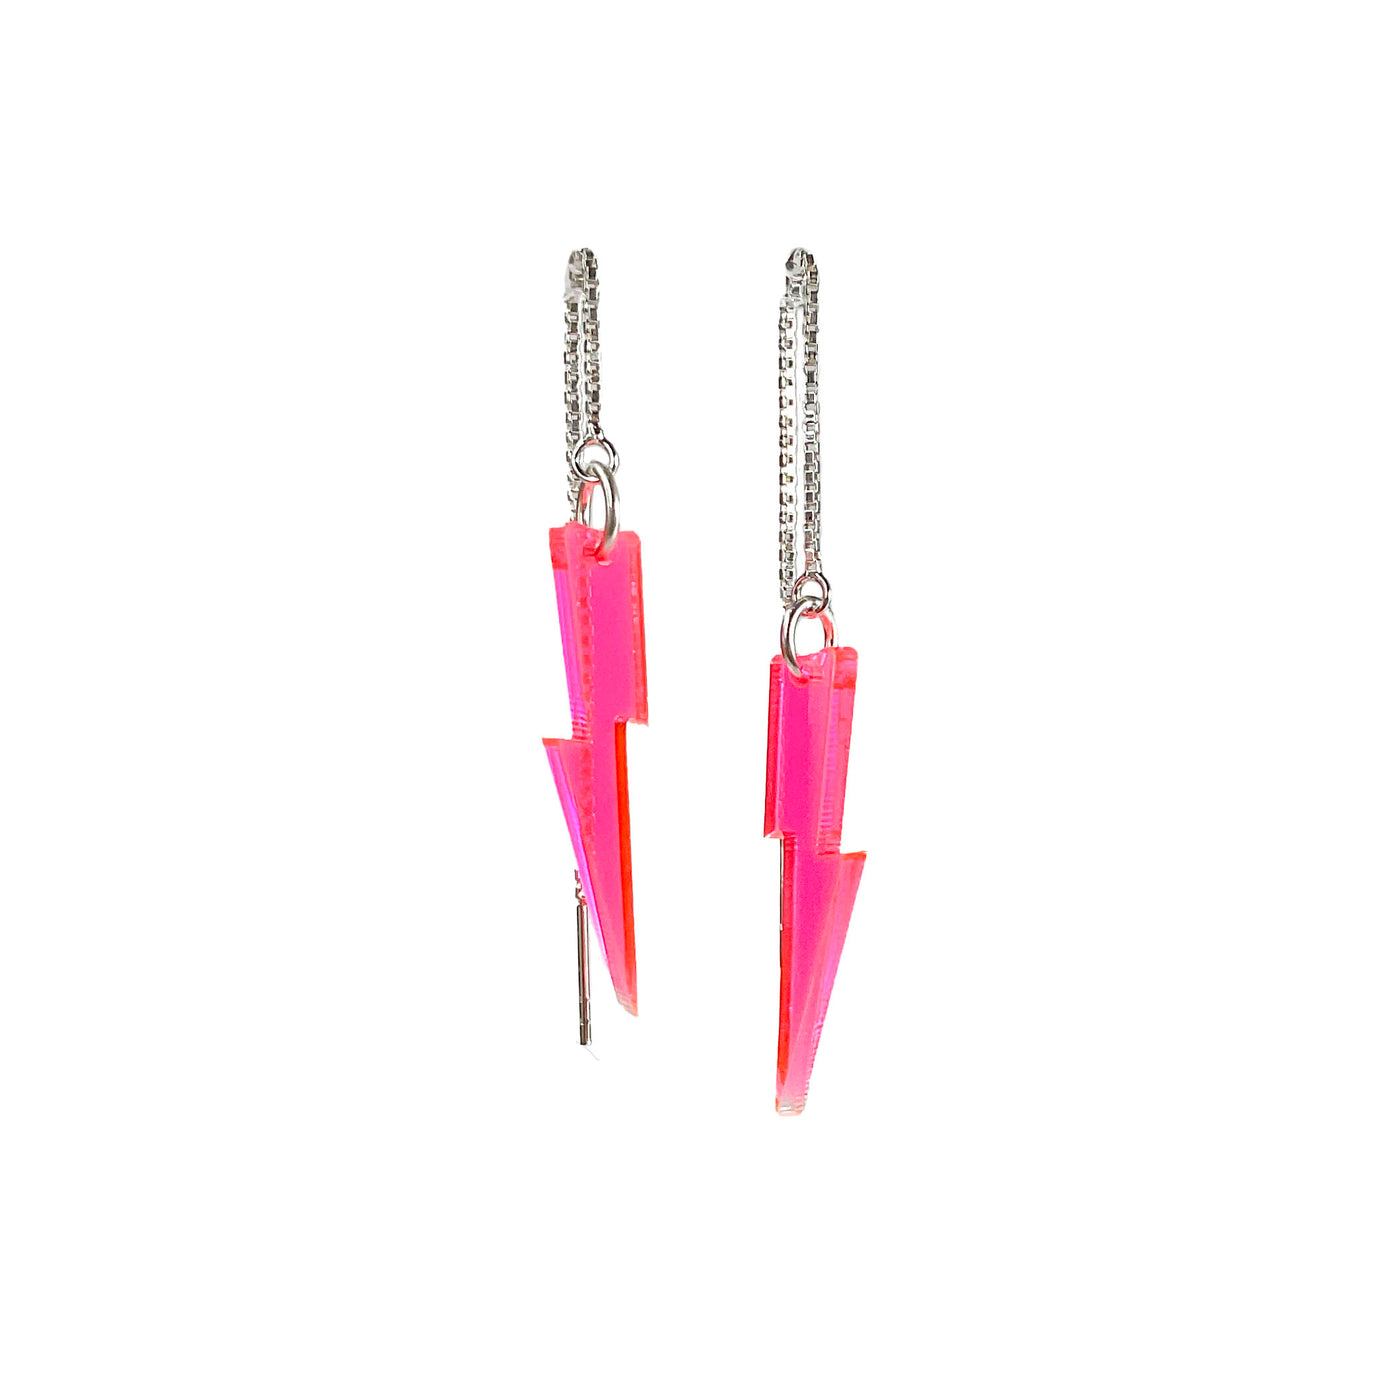 Transparent neon pink ear threader earrings on a white background.